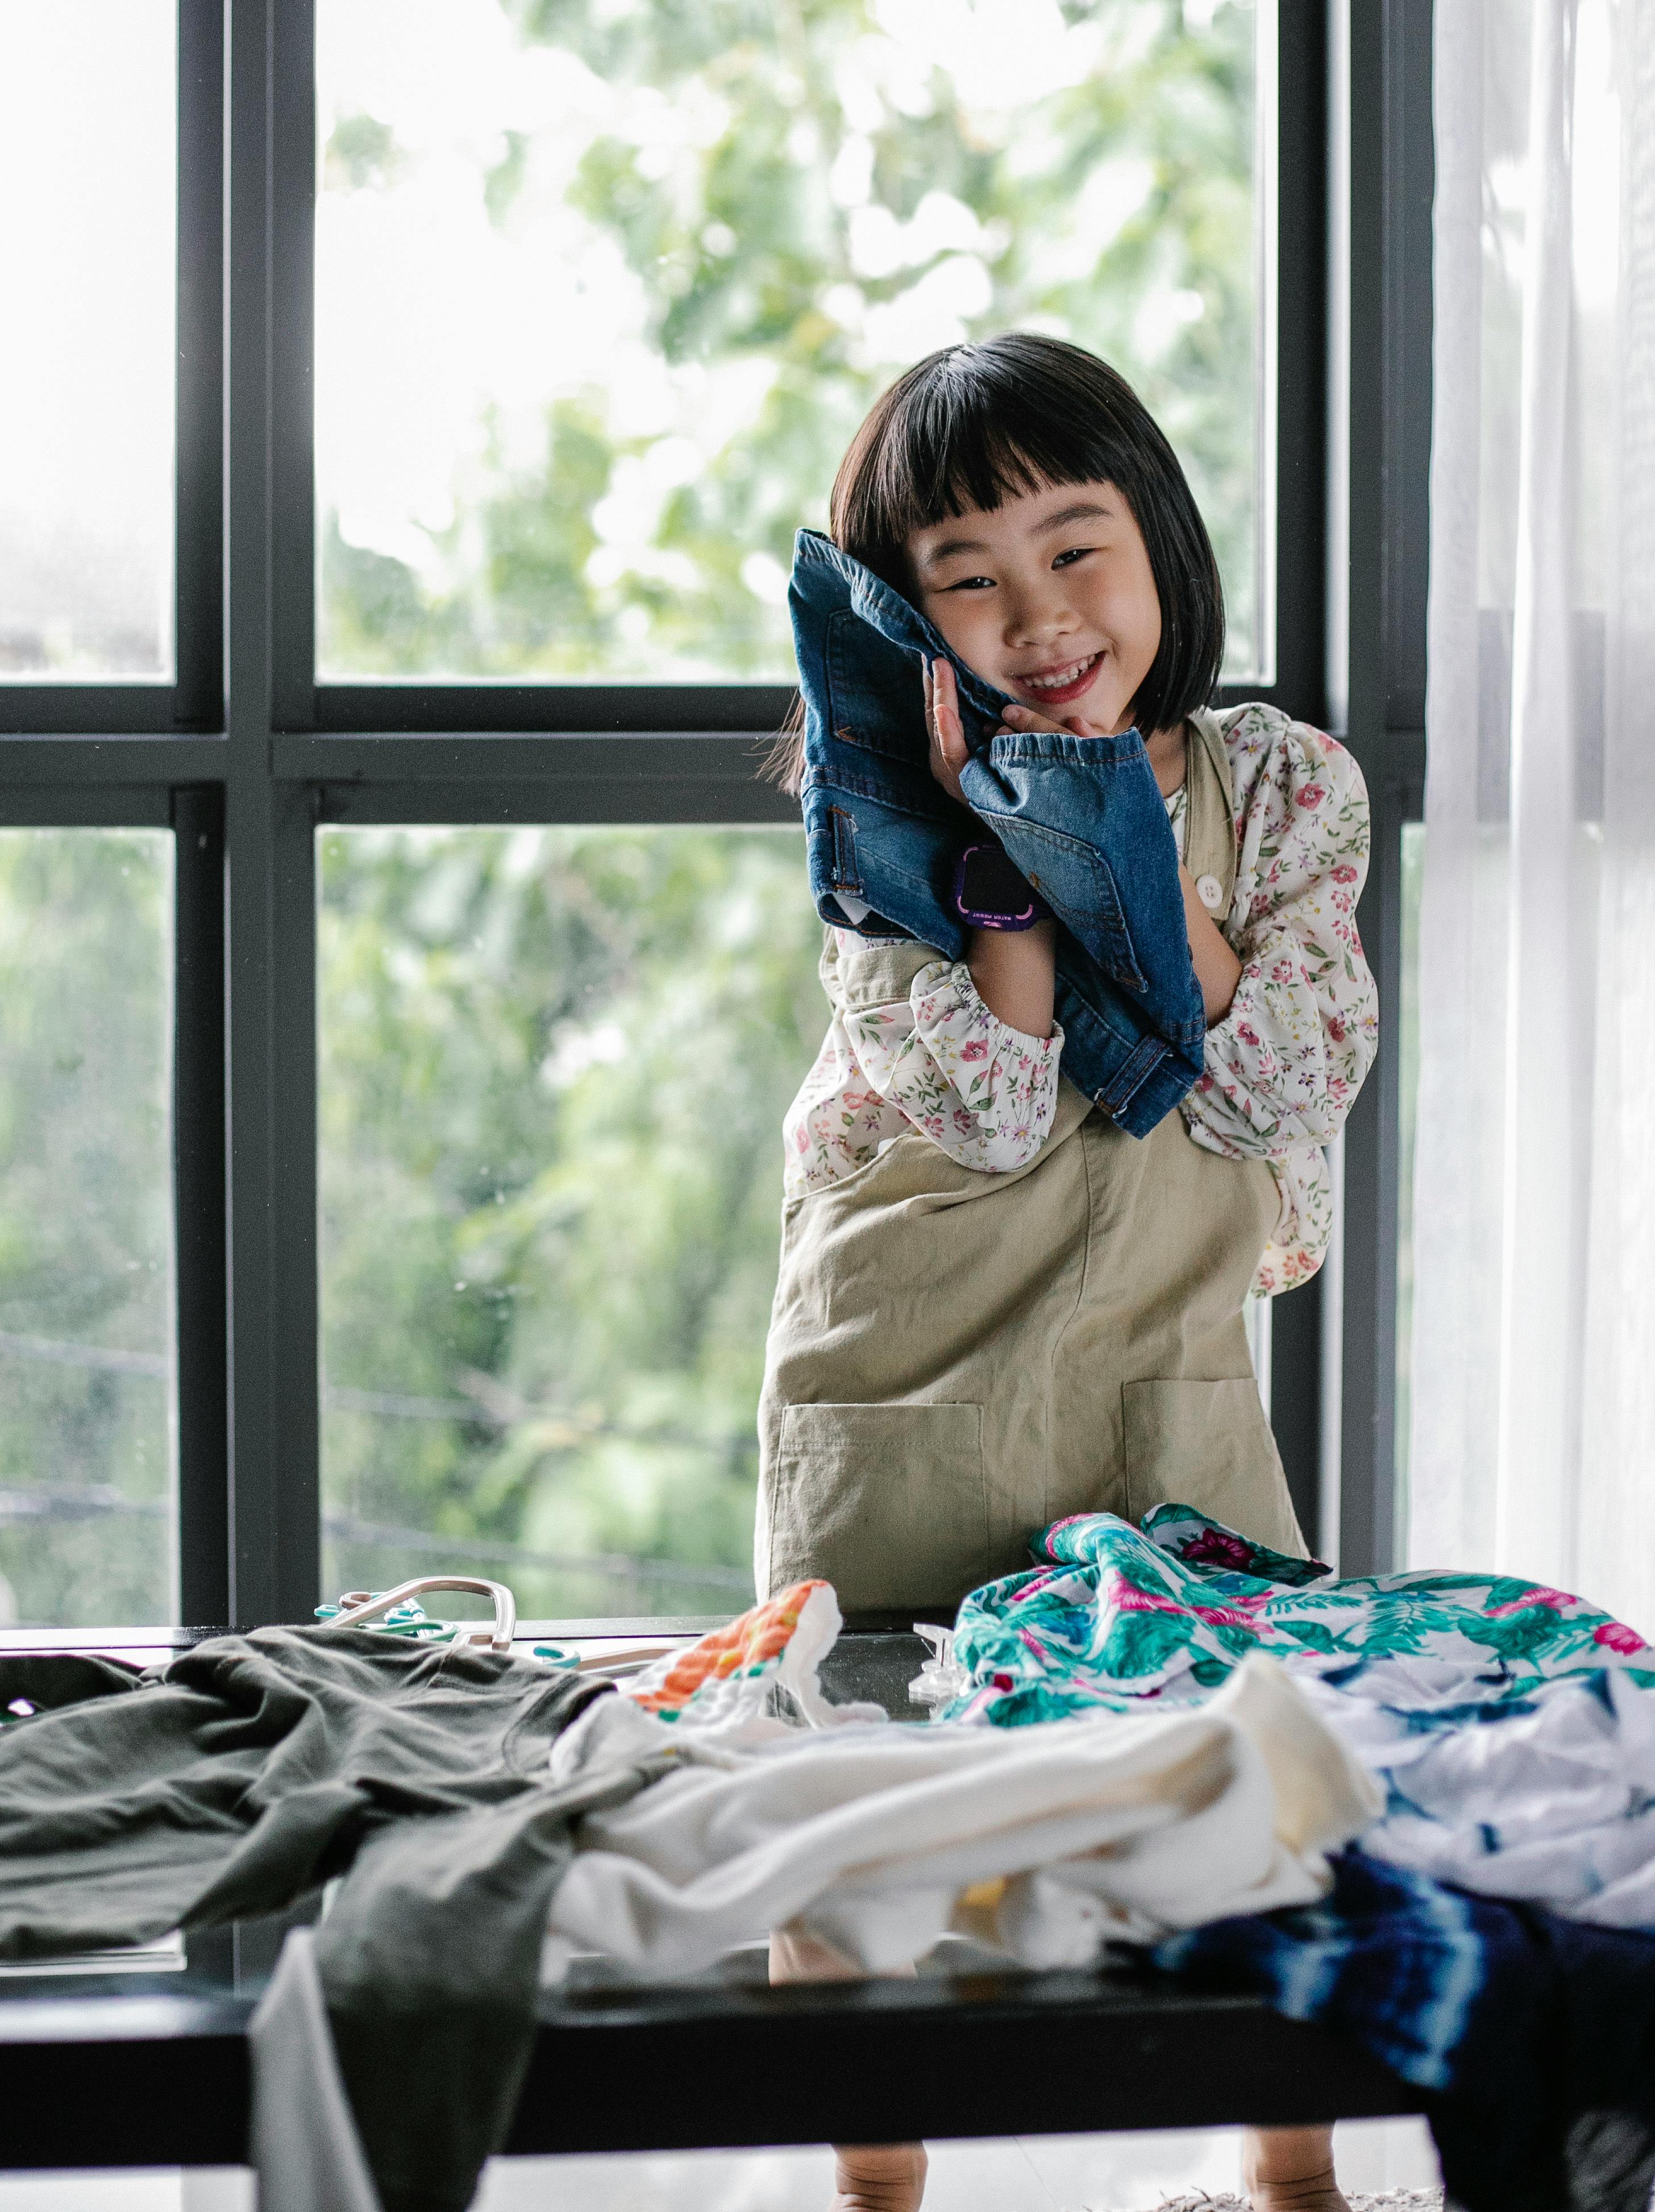 4 Pointers That Your Children are Ready to Choose Their Own Clothes